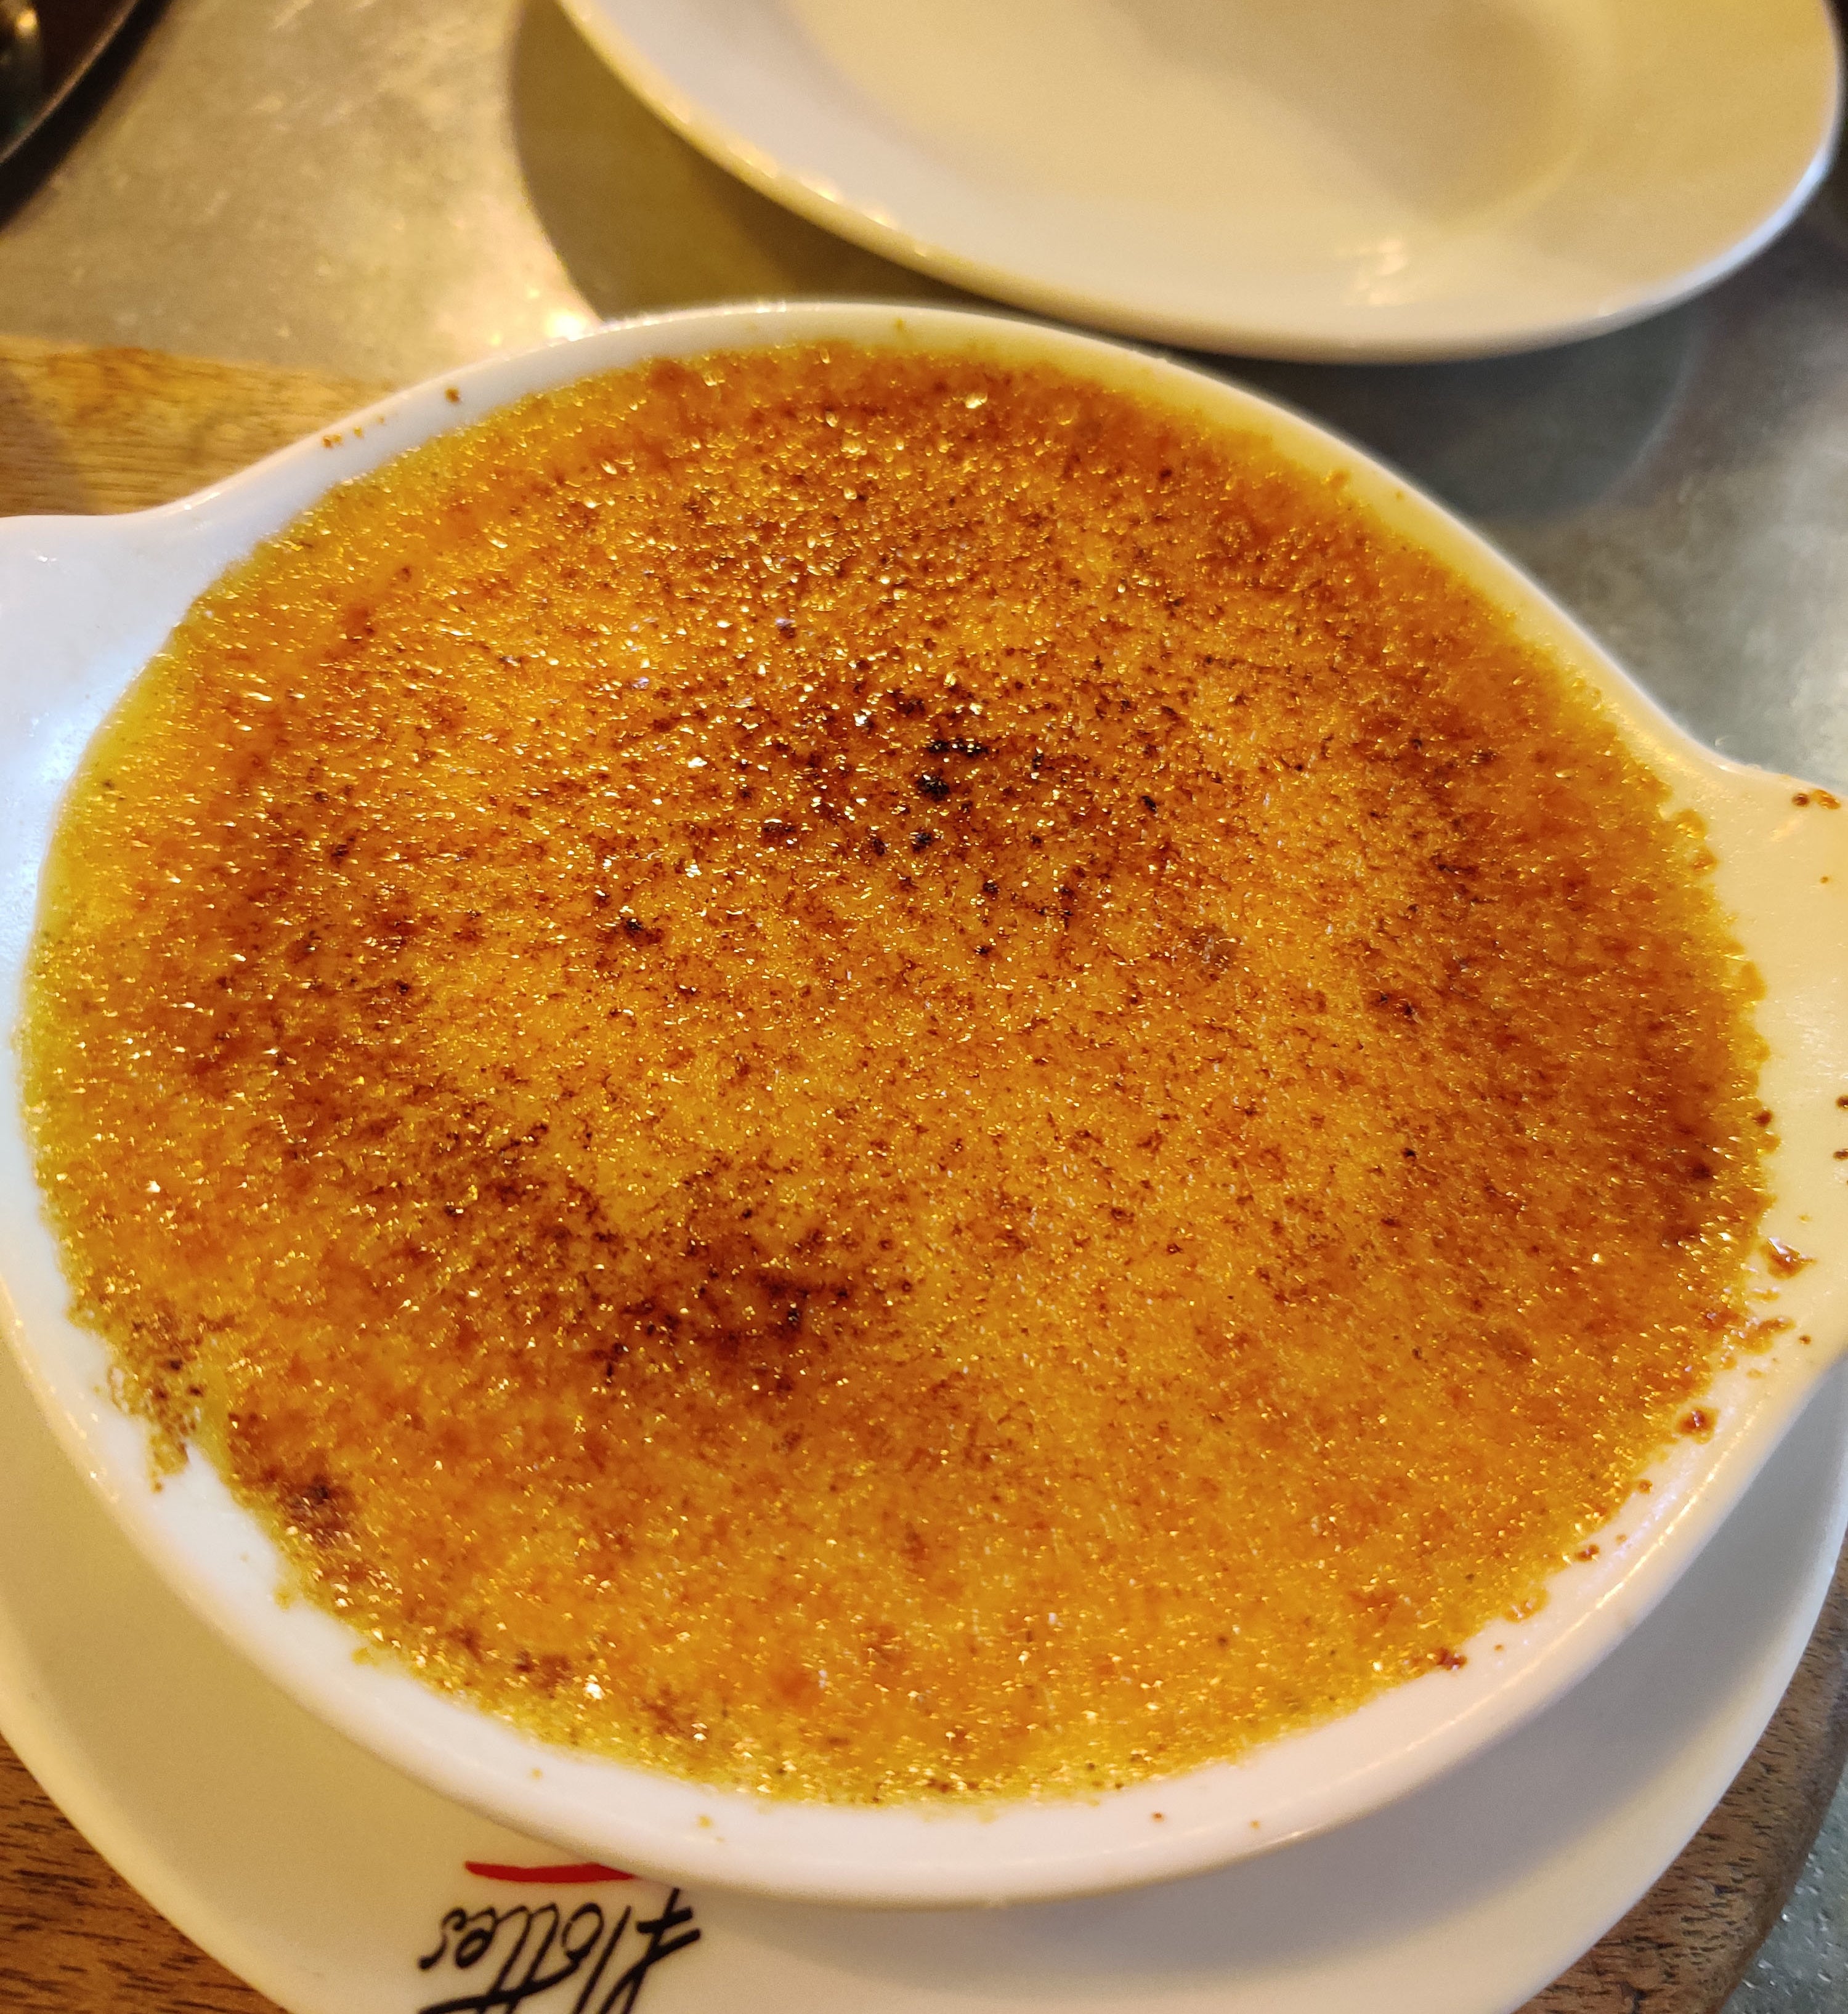 A dish of crème brûlée with a caramelized sugar topping served on a white plate